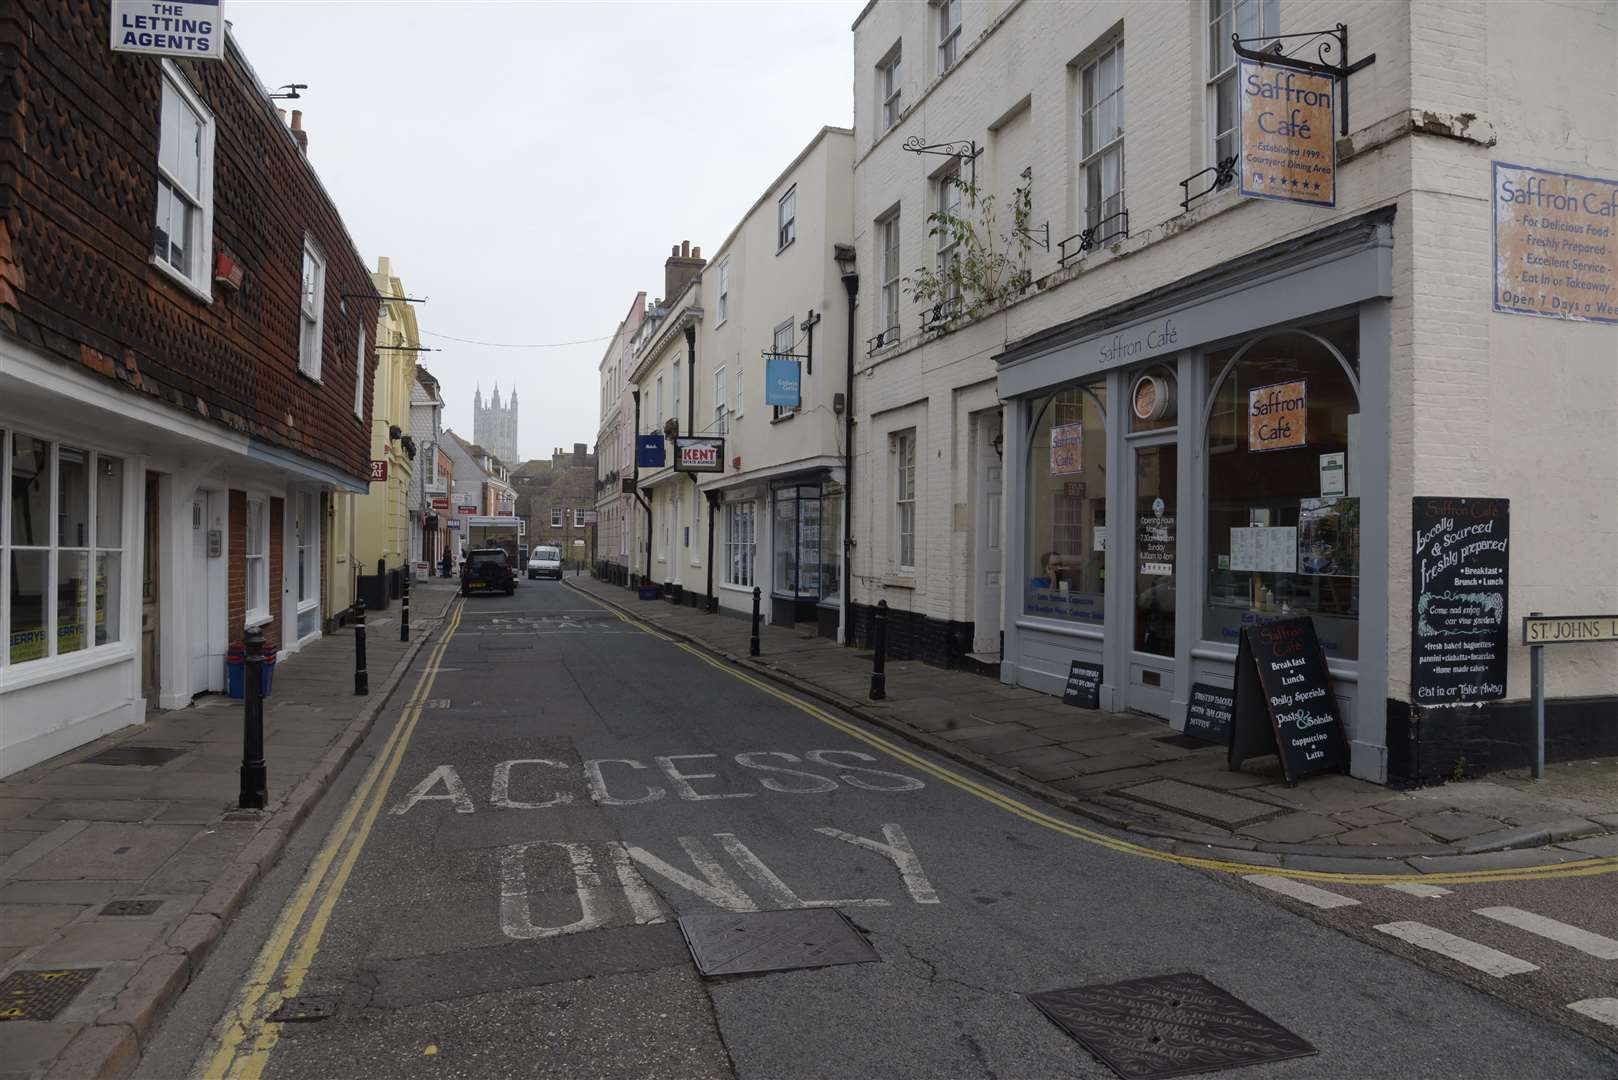 The incident took place earlier this month near Castle Street in Canterbury